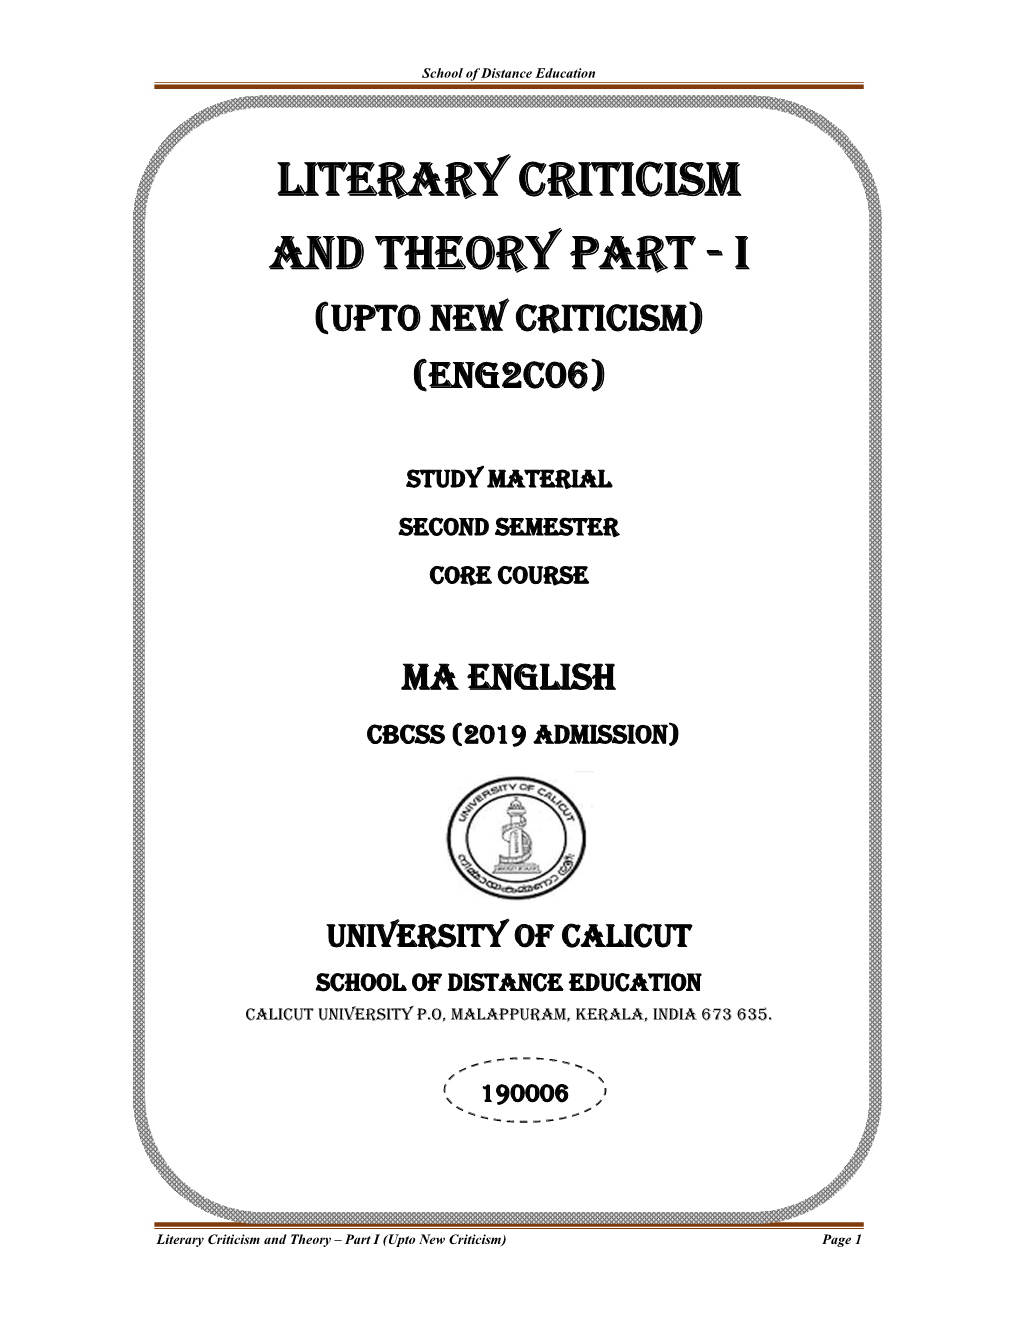 Literary Criticism and Theory Part - I (Upto New Criticism) (Eng2c06)